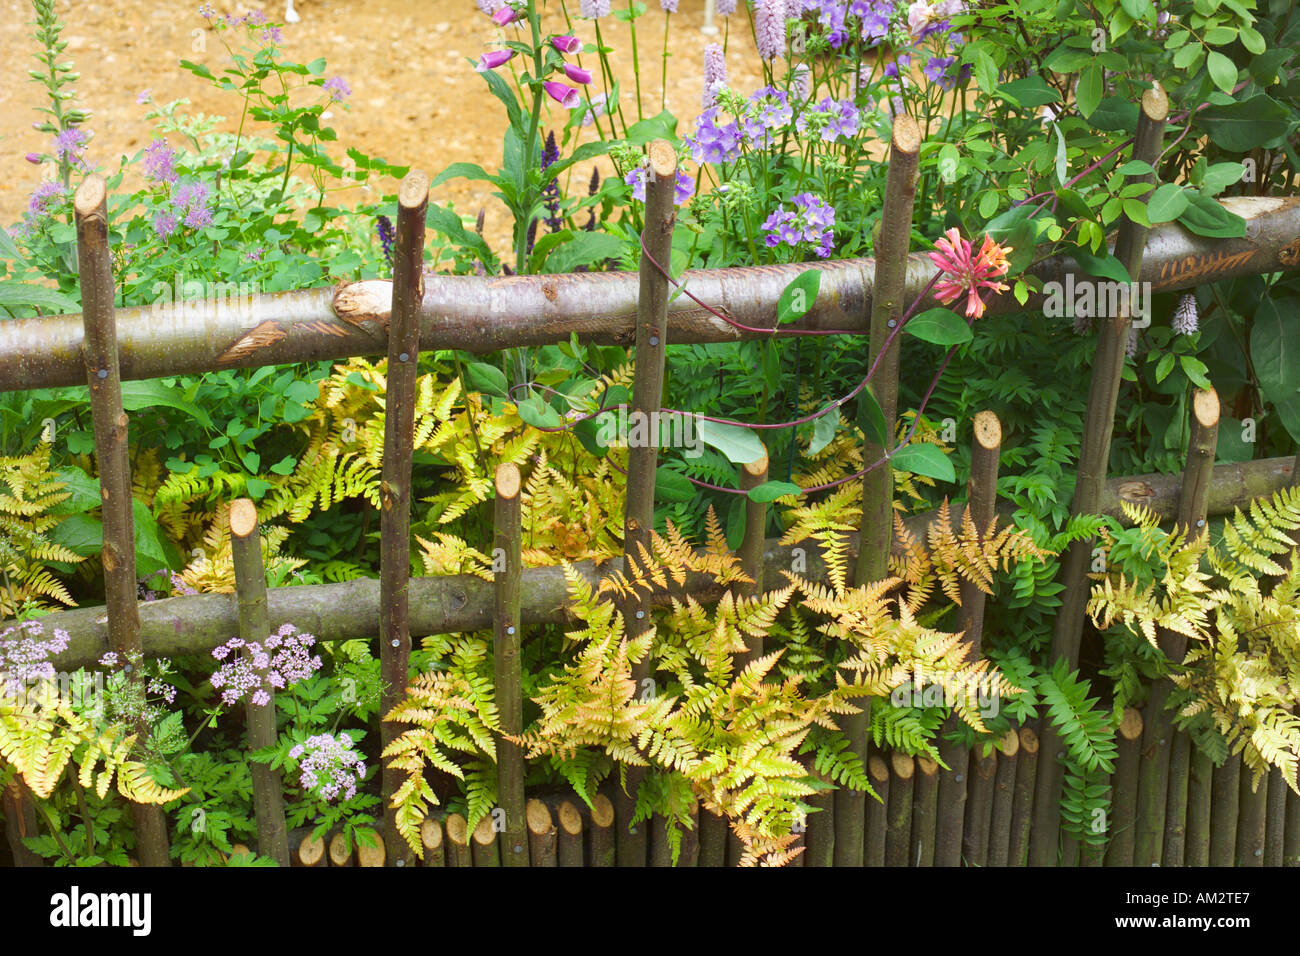 The Chelsea Flower Show 2005 small cottage garden with a natural feel rustic wooden fencing with Lonicera honeysuckle climbing Stock Photo